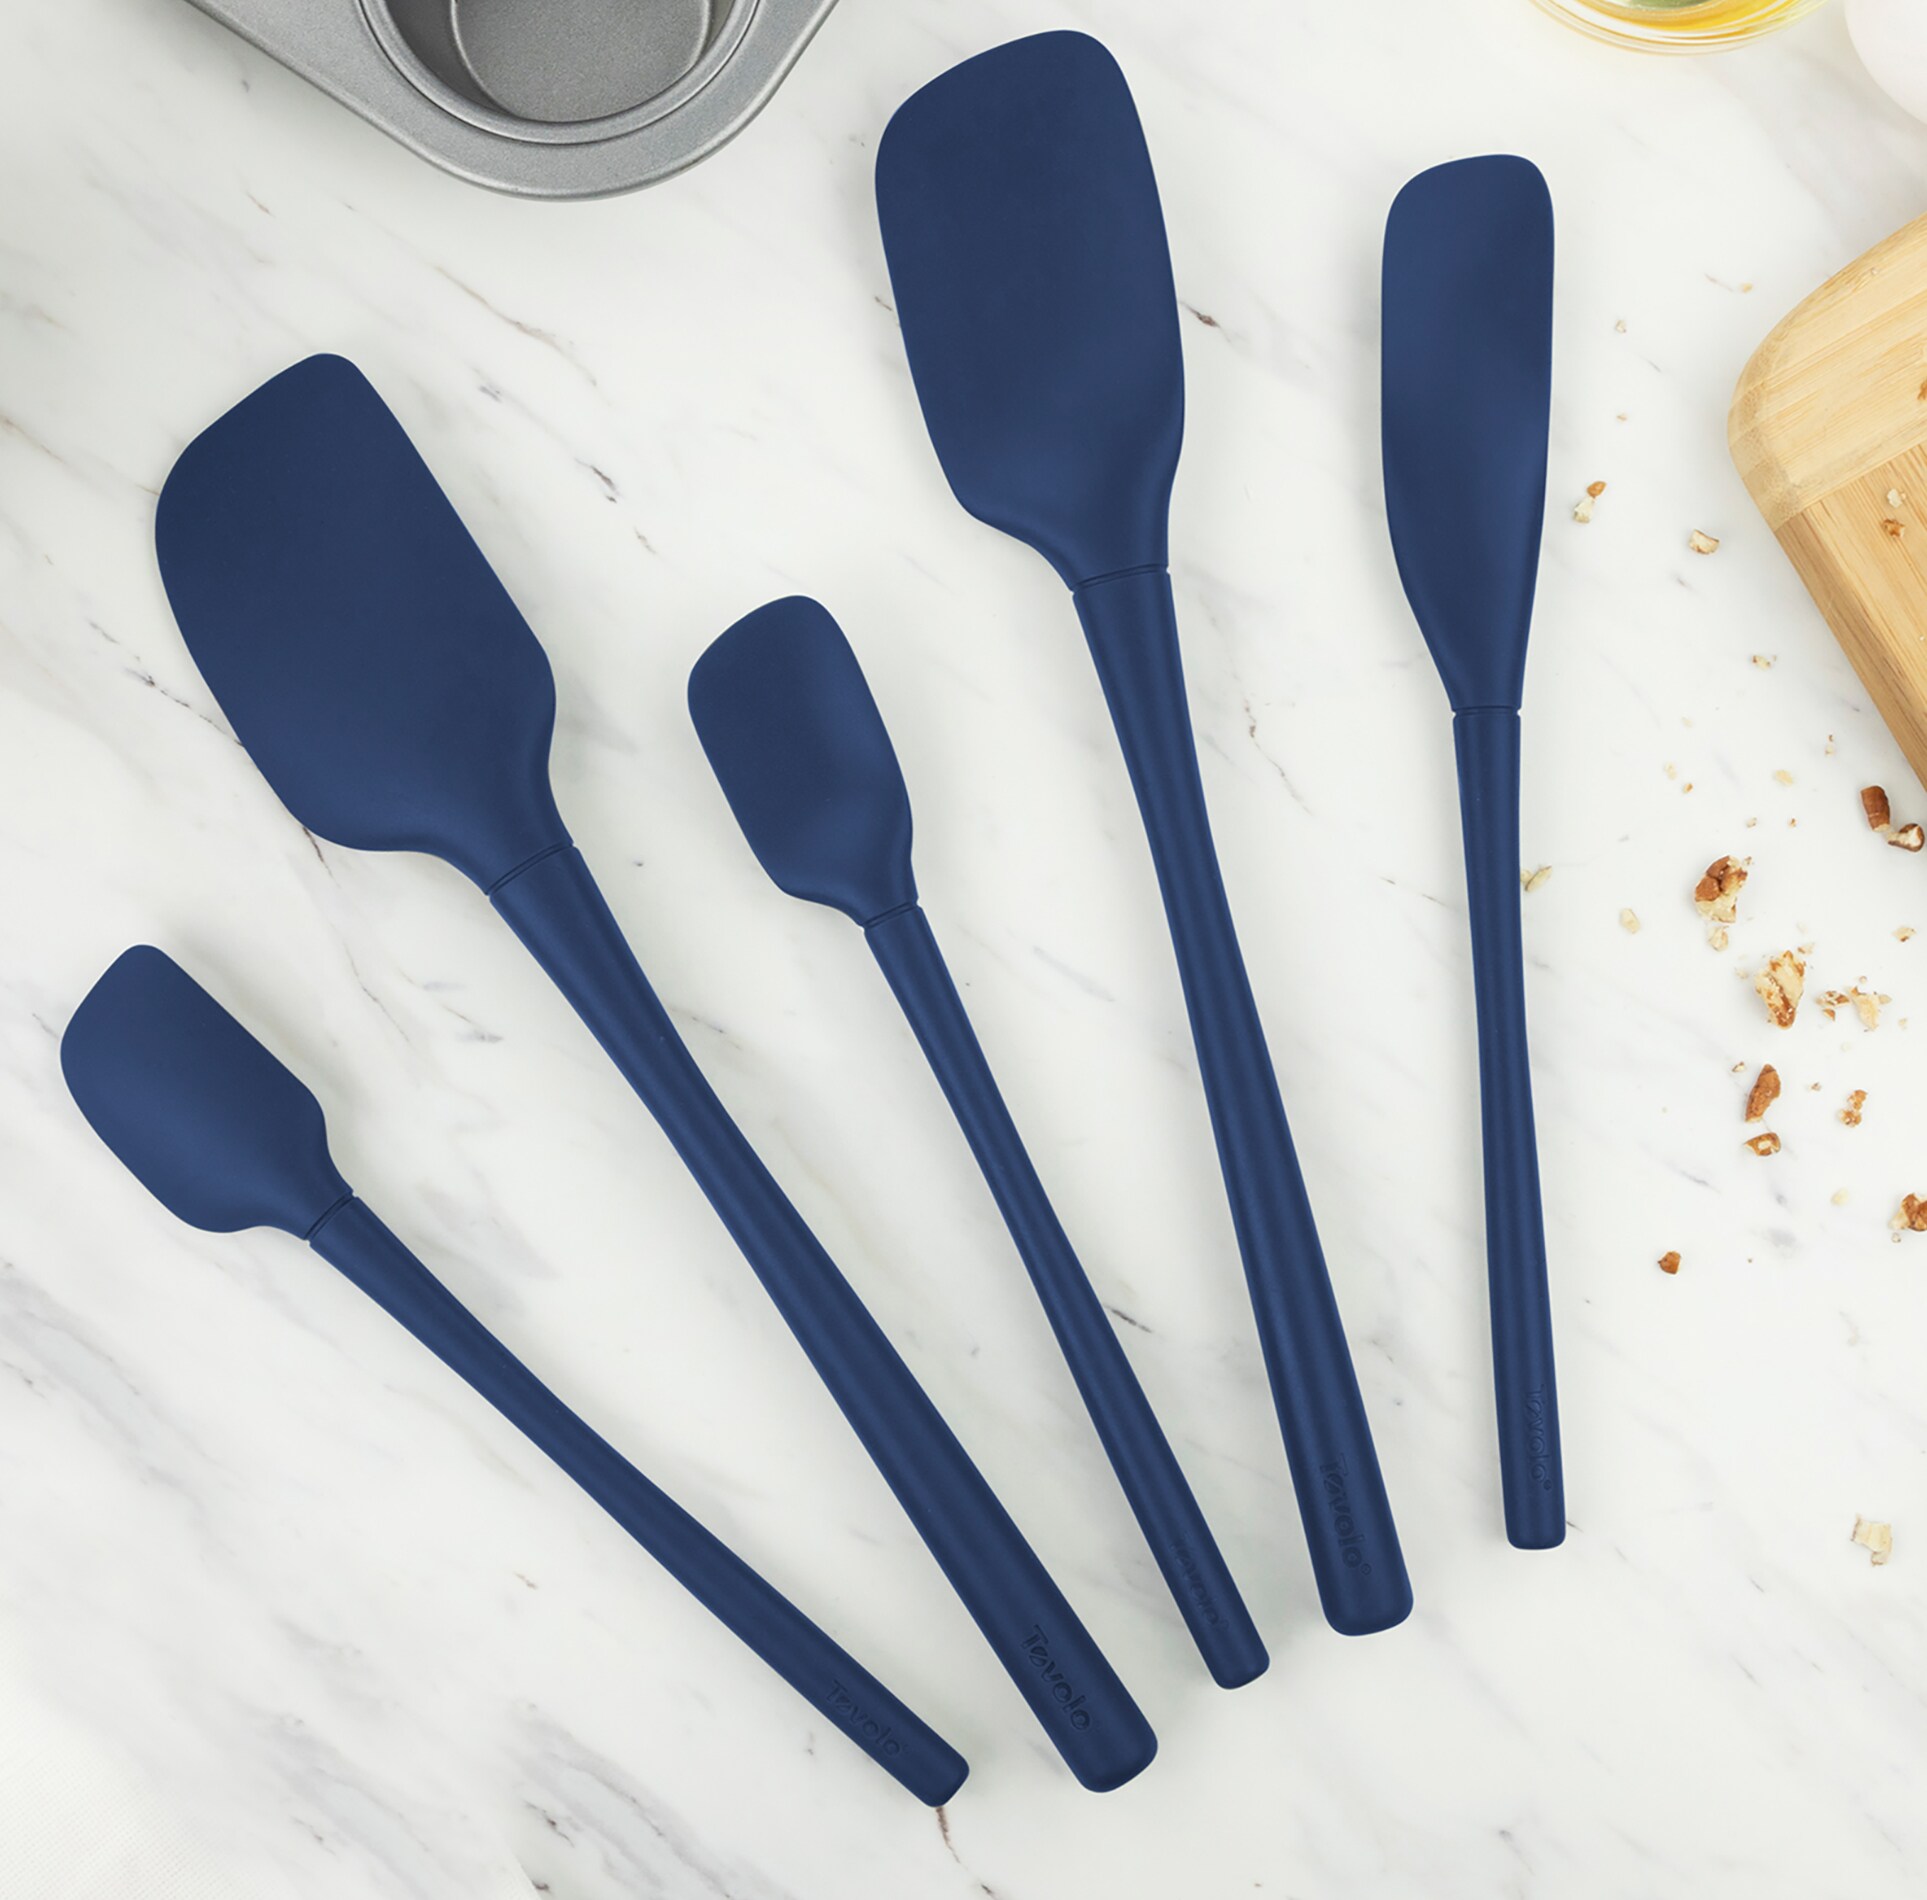 Tovolo Flex-Core Stainless Steel Handled Spatula - Stratus Blue